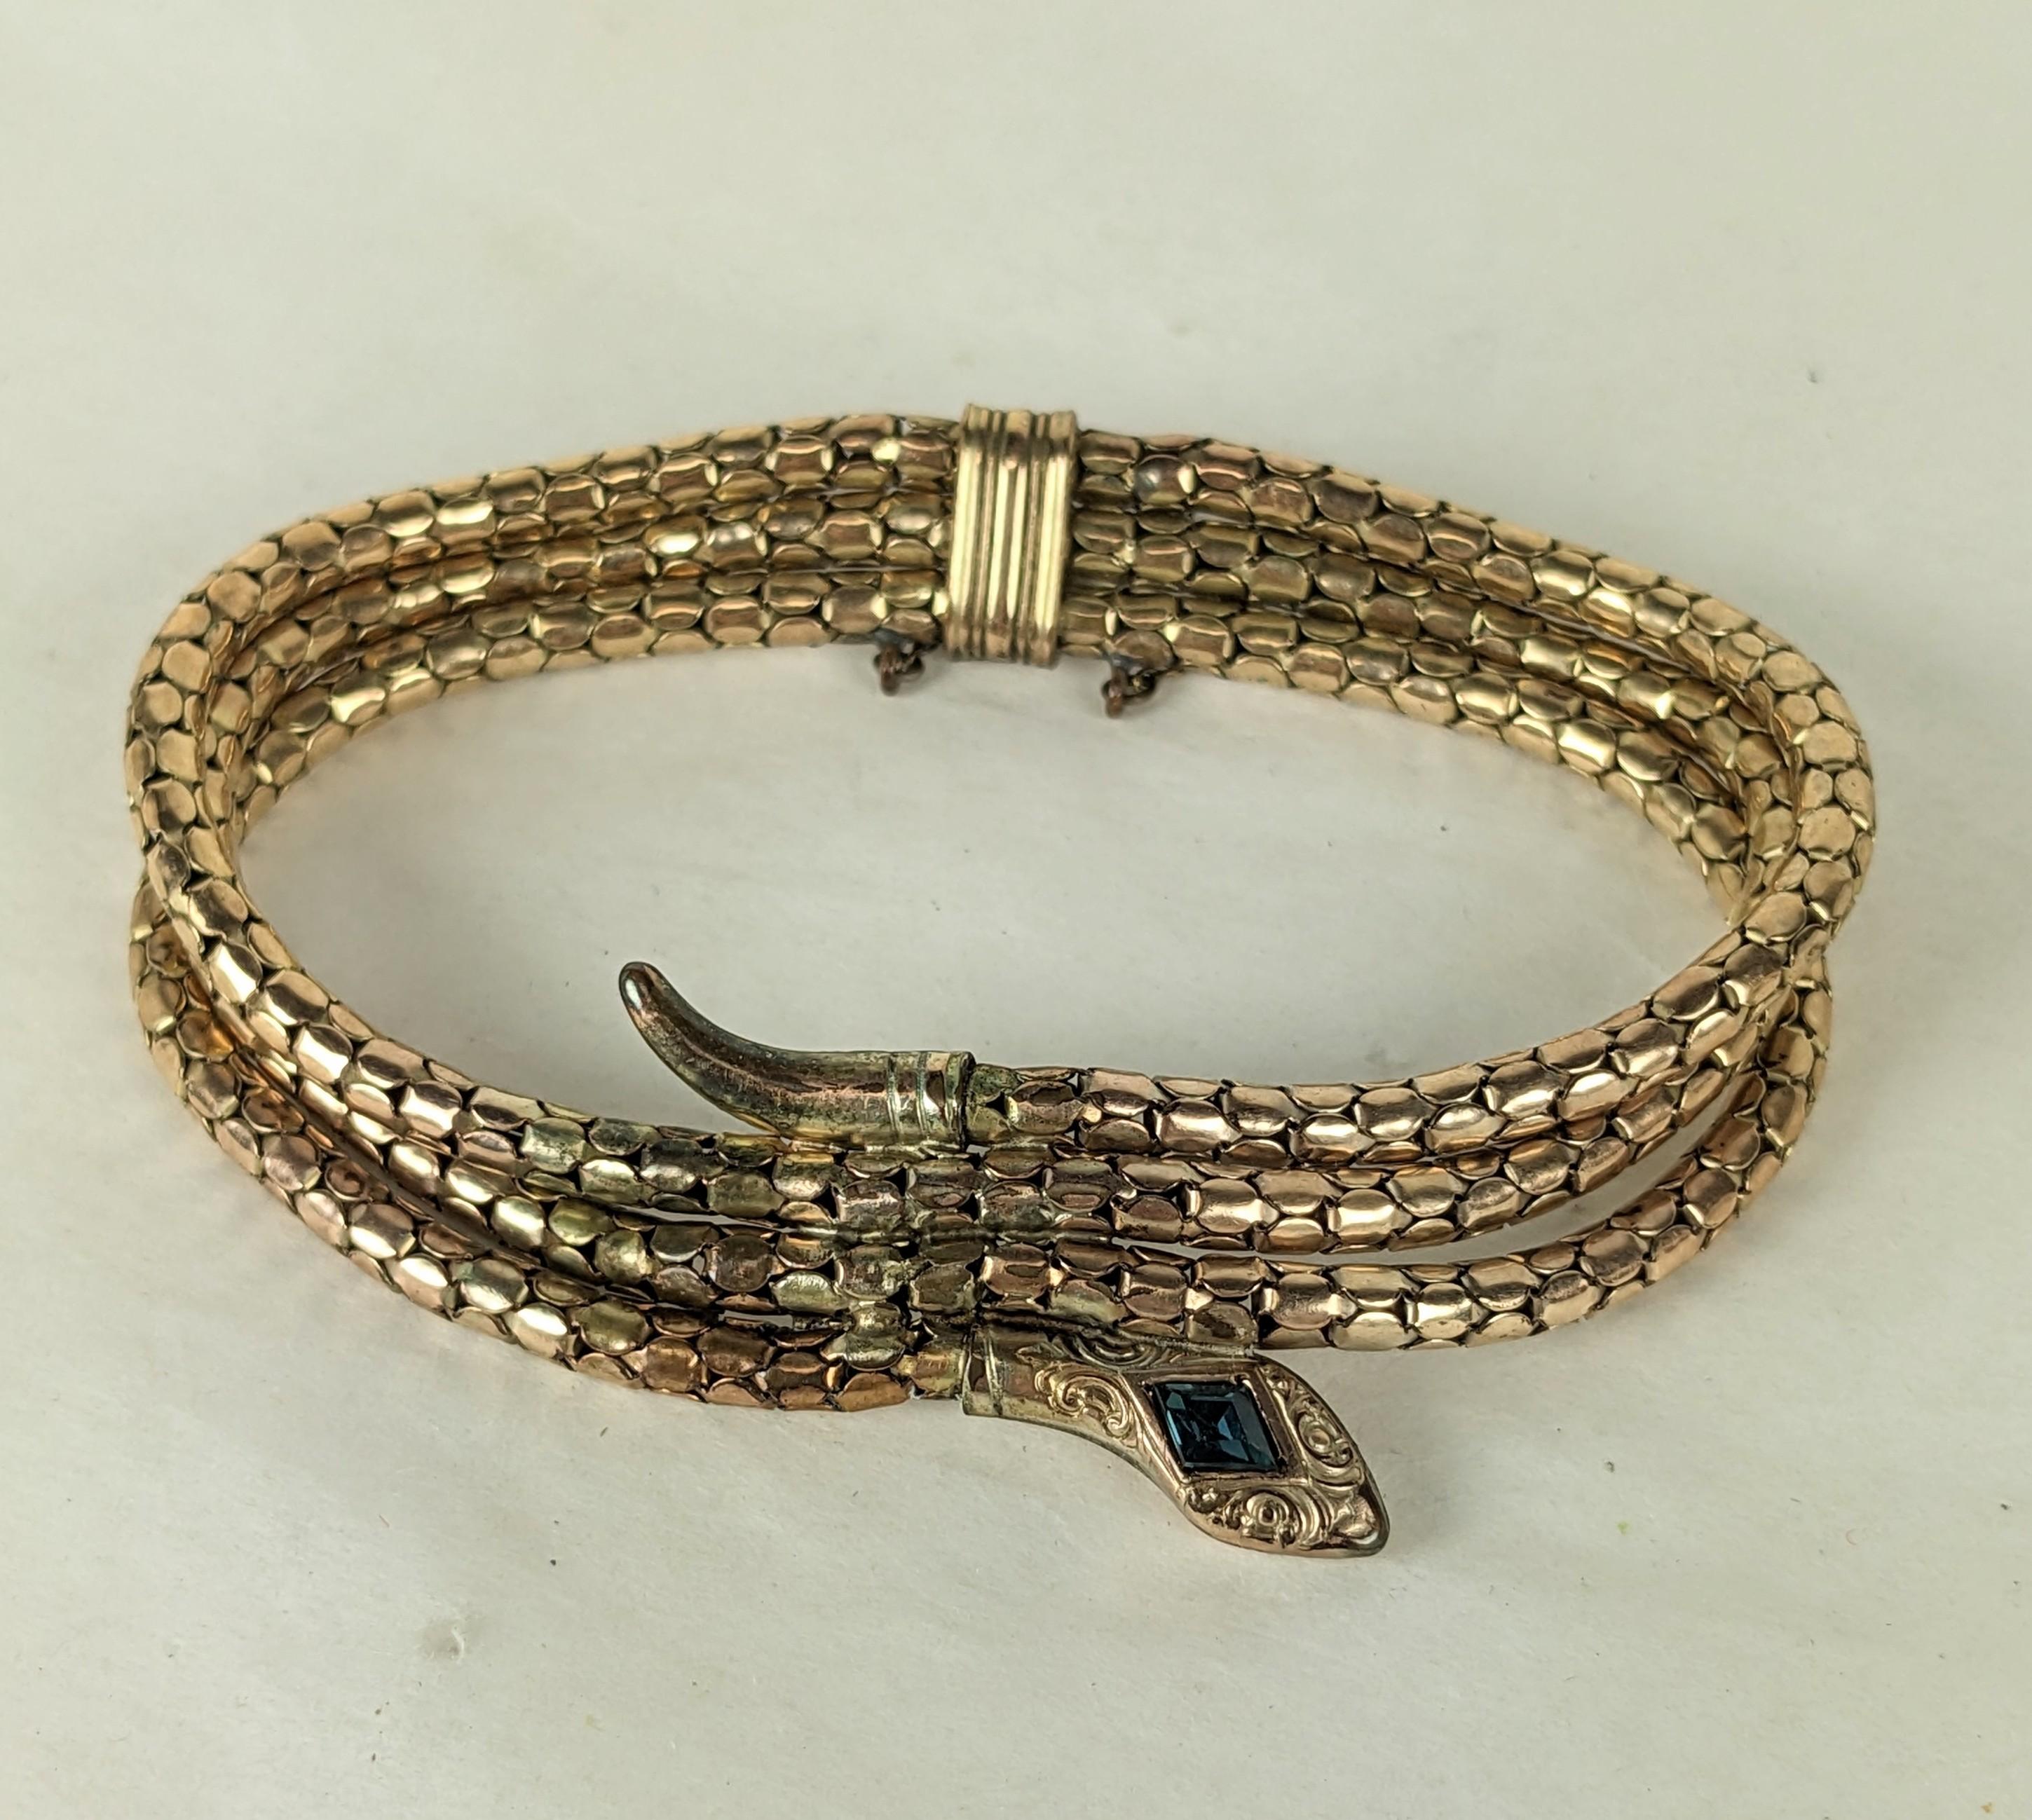 Art Deco Snake Gold Filled Bracelet composed of triple snake chain with head and tail accented at front. Flexible link with sapphire paste head. 1930's European. 7.25